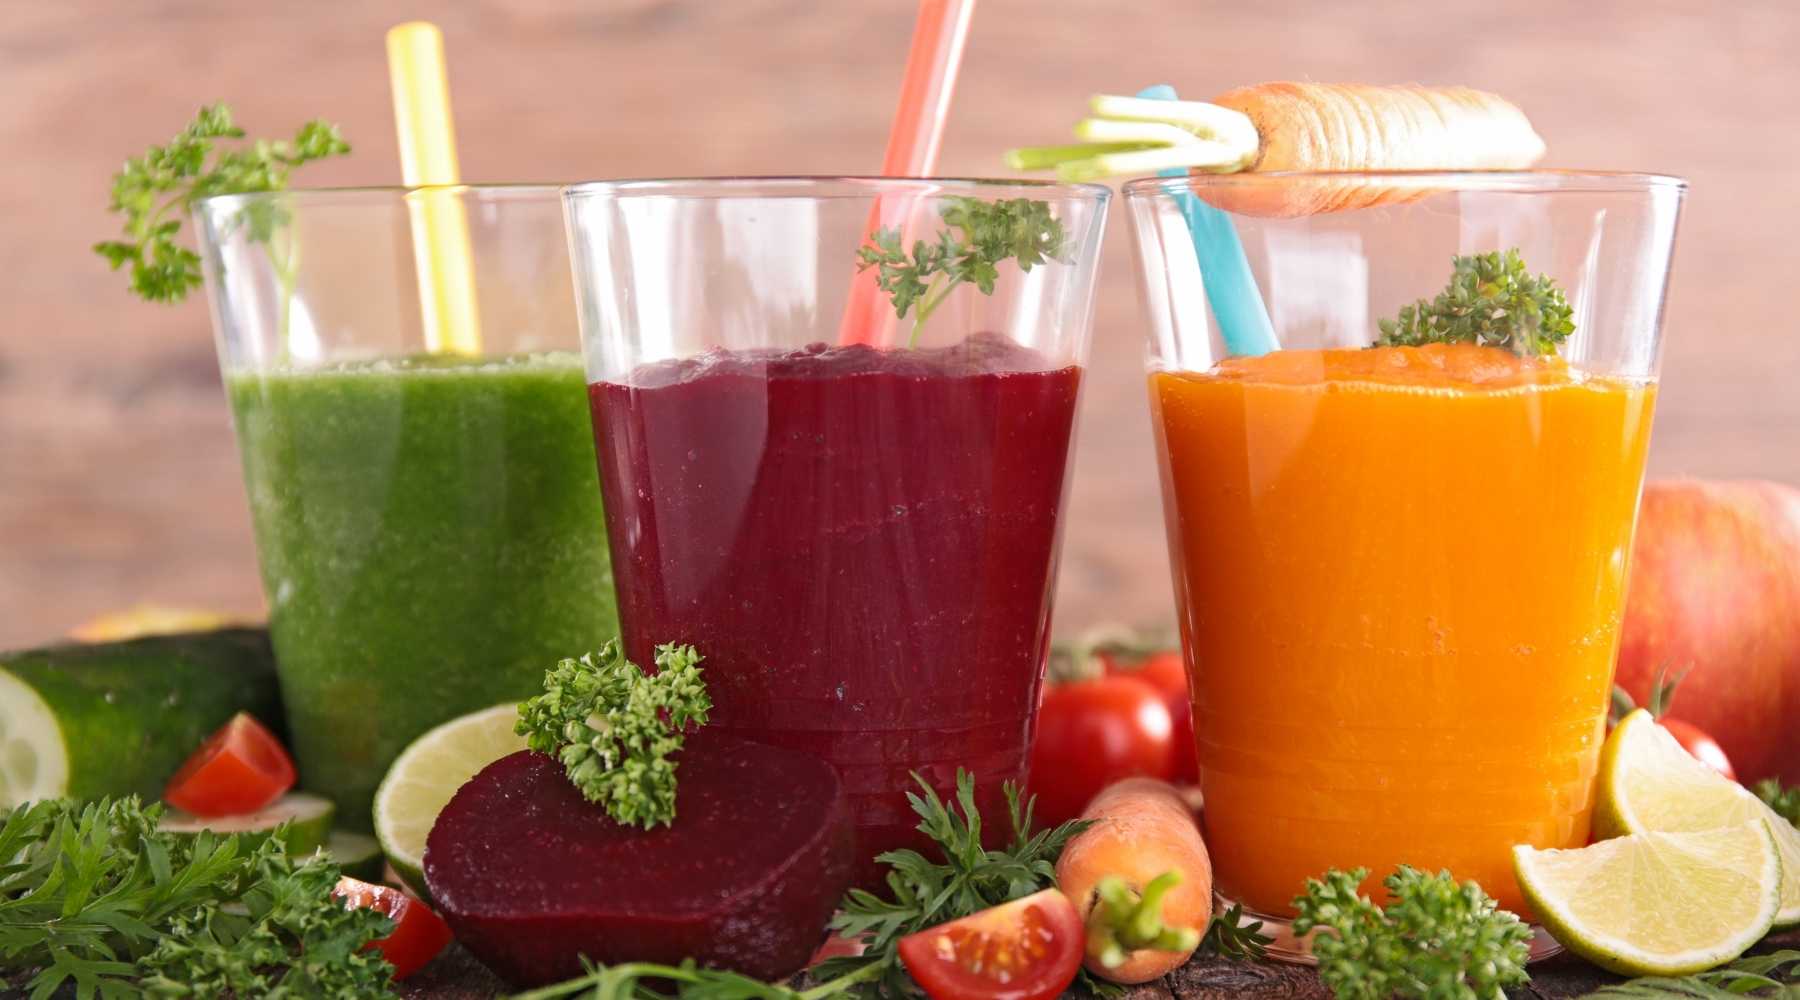 Delicious Energizing Beet, Kale, And Carrot Juice Recipe